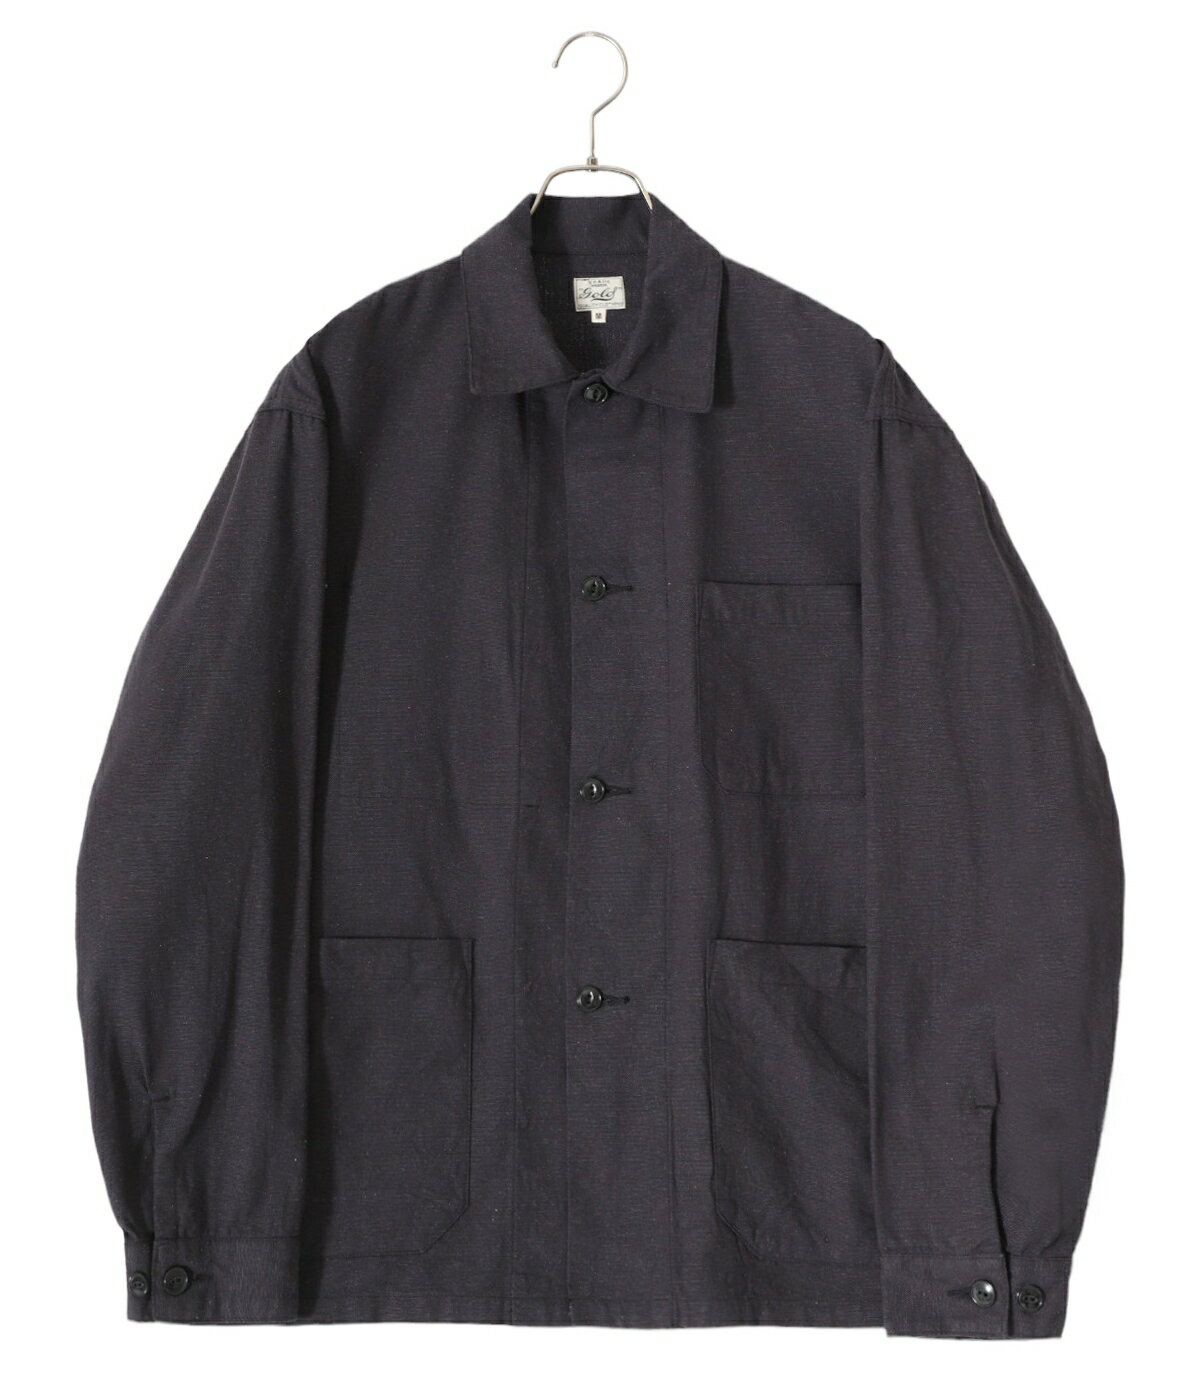 mG^[vCY GOLD / S[h : COTTON/SILK NEP DUCK WORK JACKET / S2F : Rbg VNlbv_bN [NWPbg Jo[I[ Y AE^[ u] Wp[ I[o[VGbg _ Be[W : 24A-GL15474yMUSz